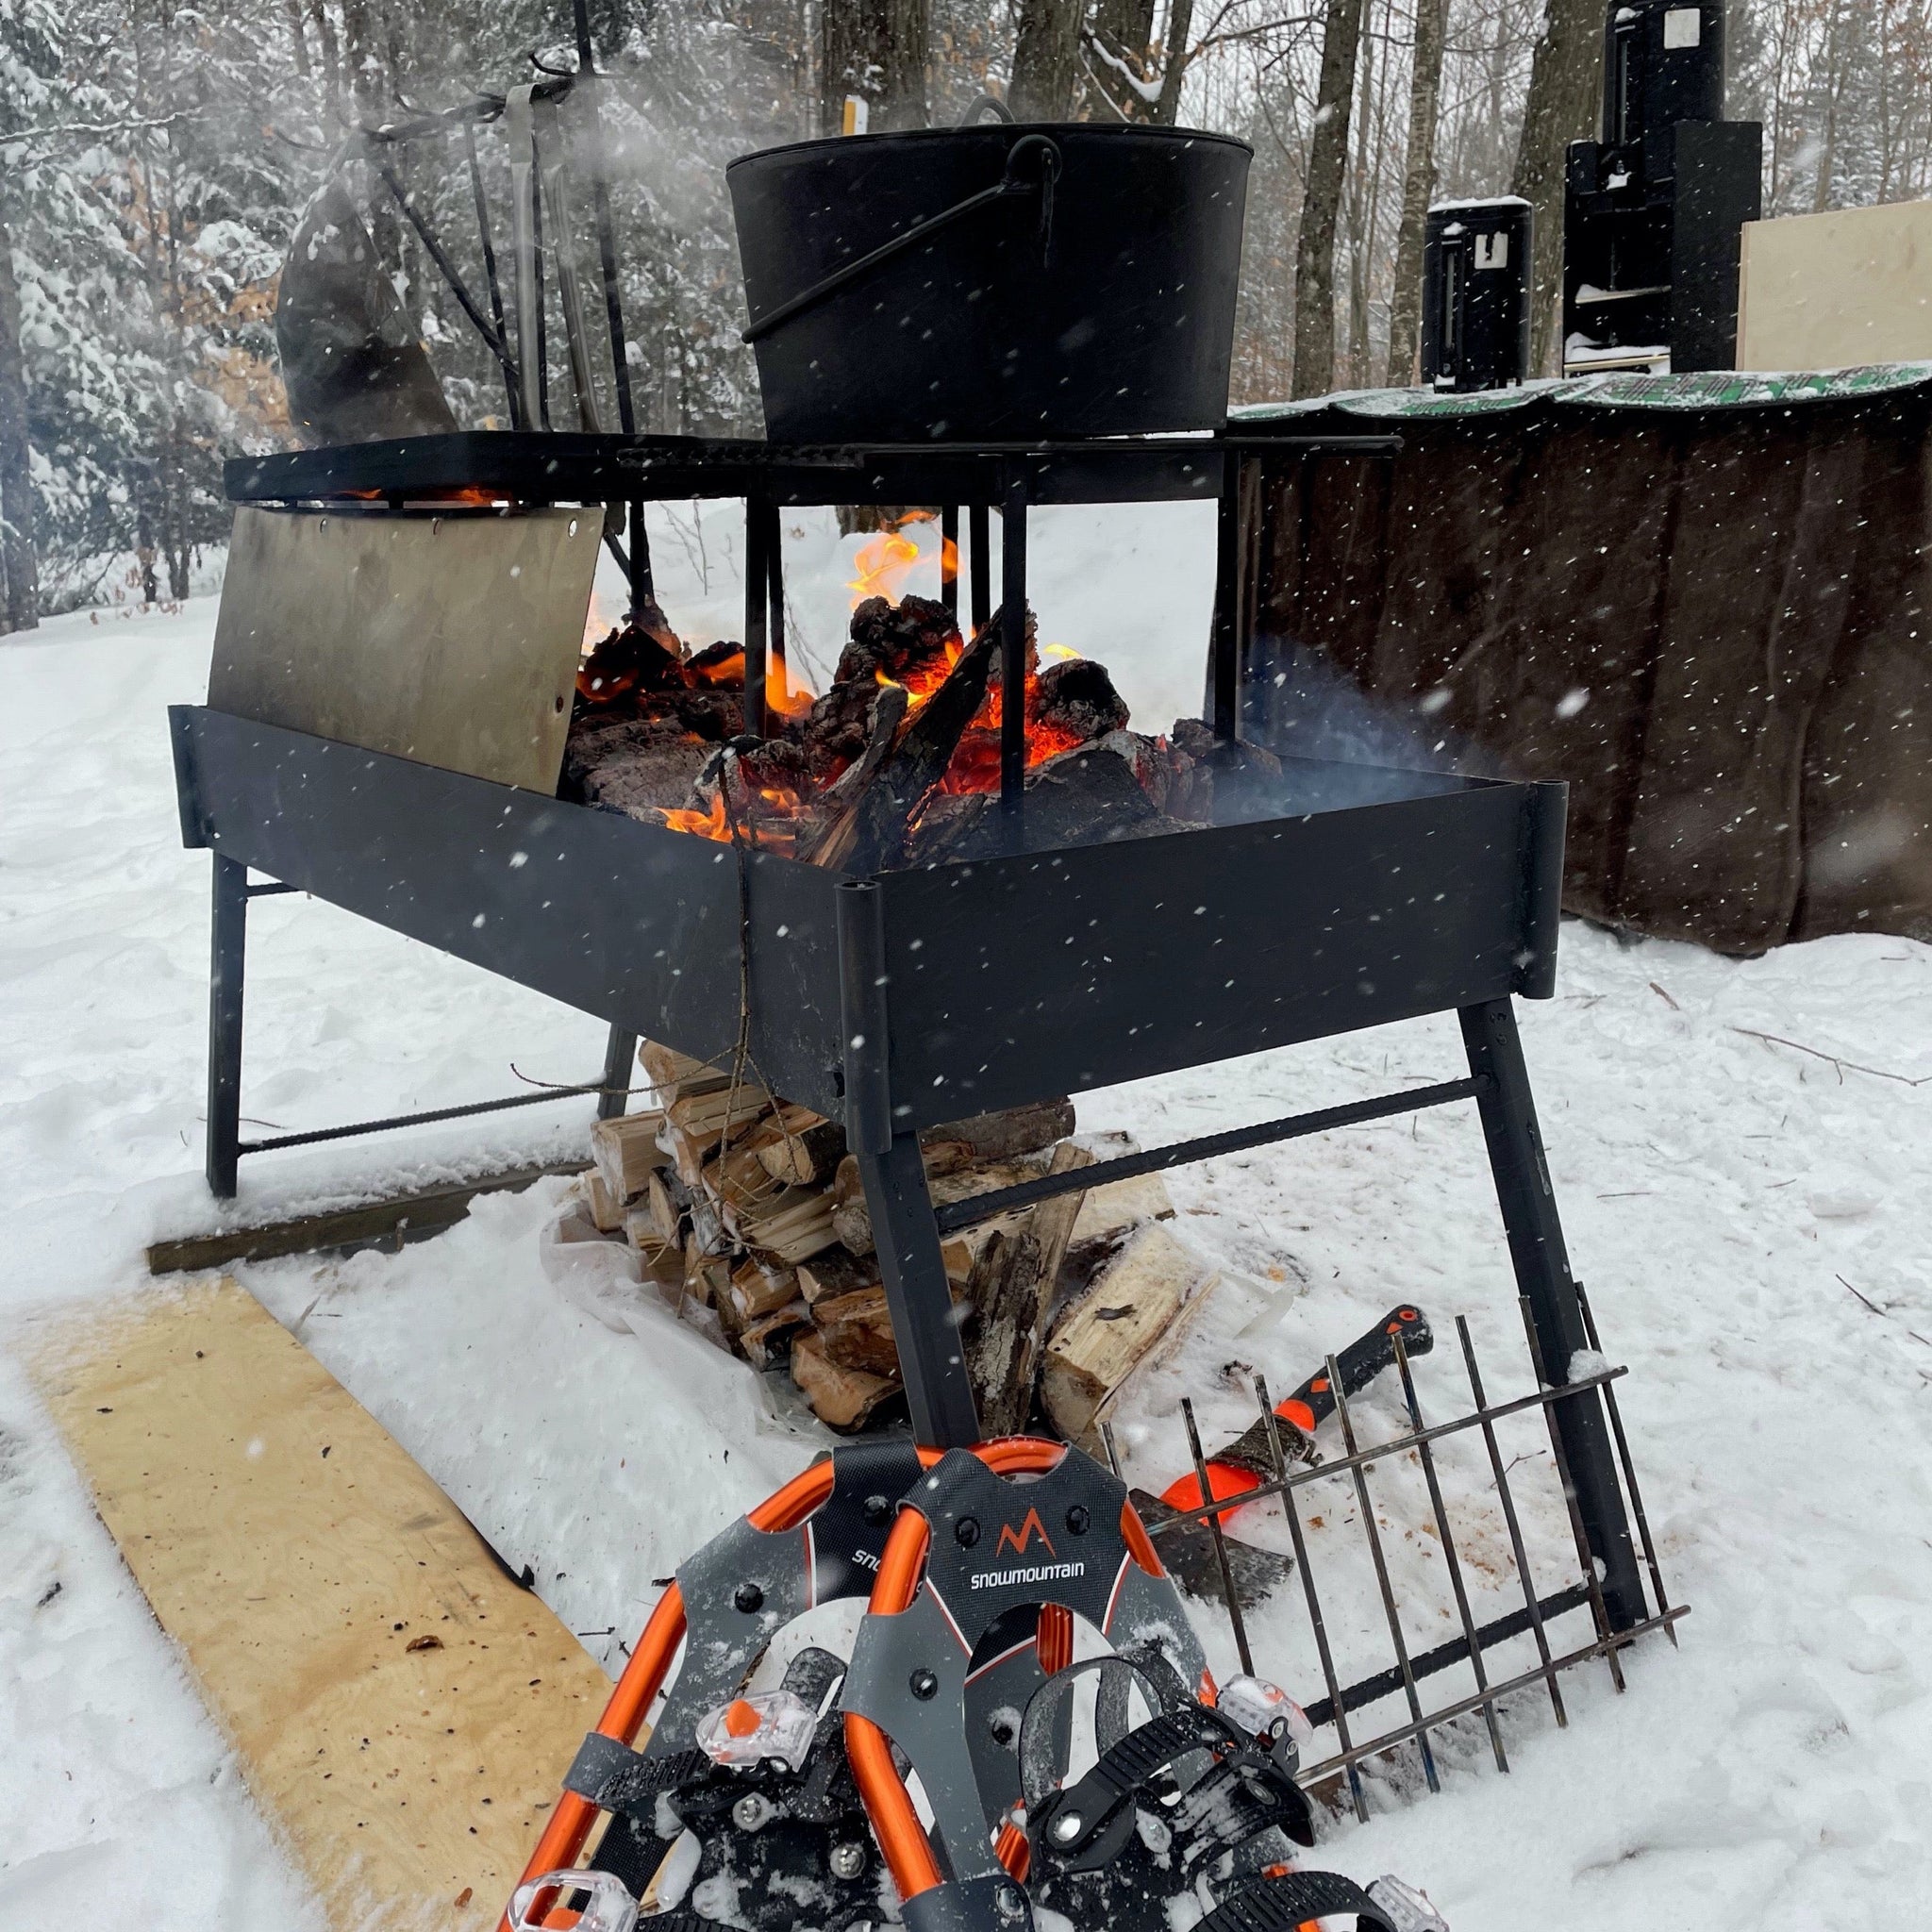 Snowshoe BBQ March 4, 2023